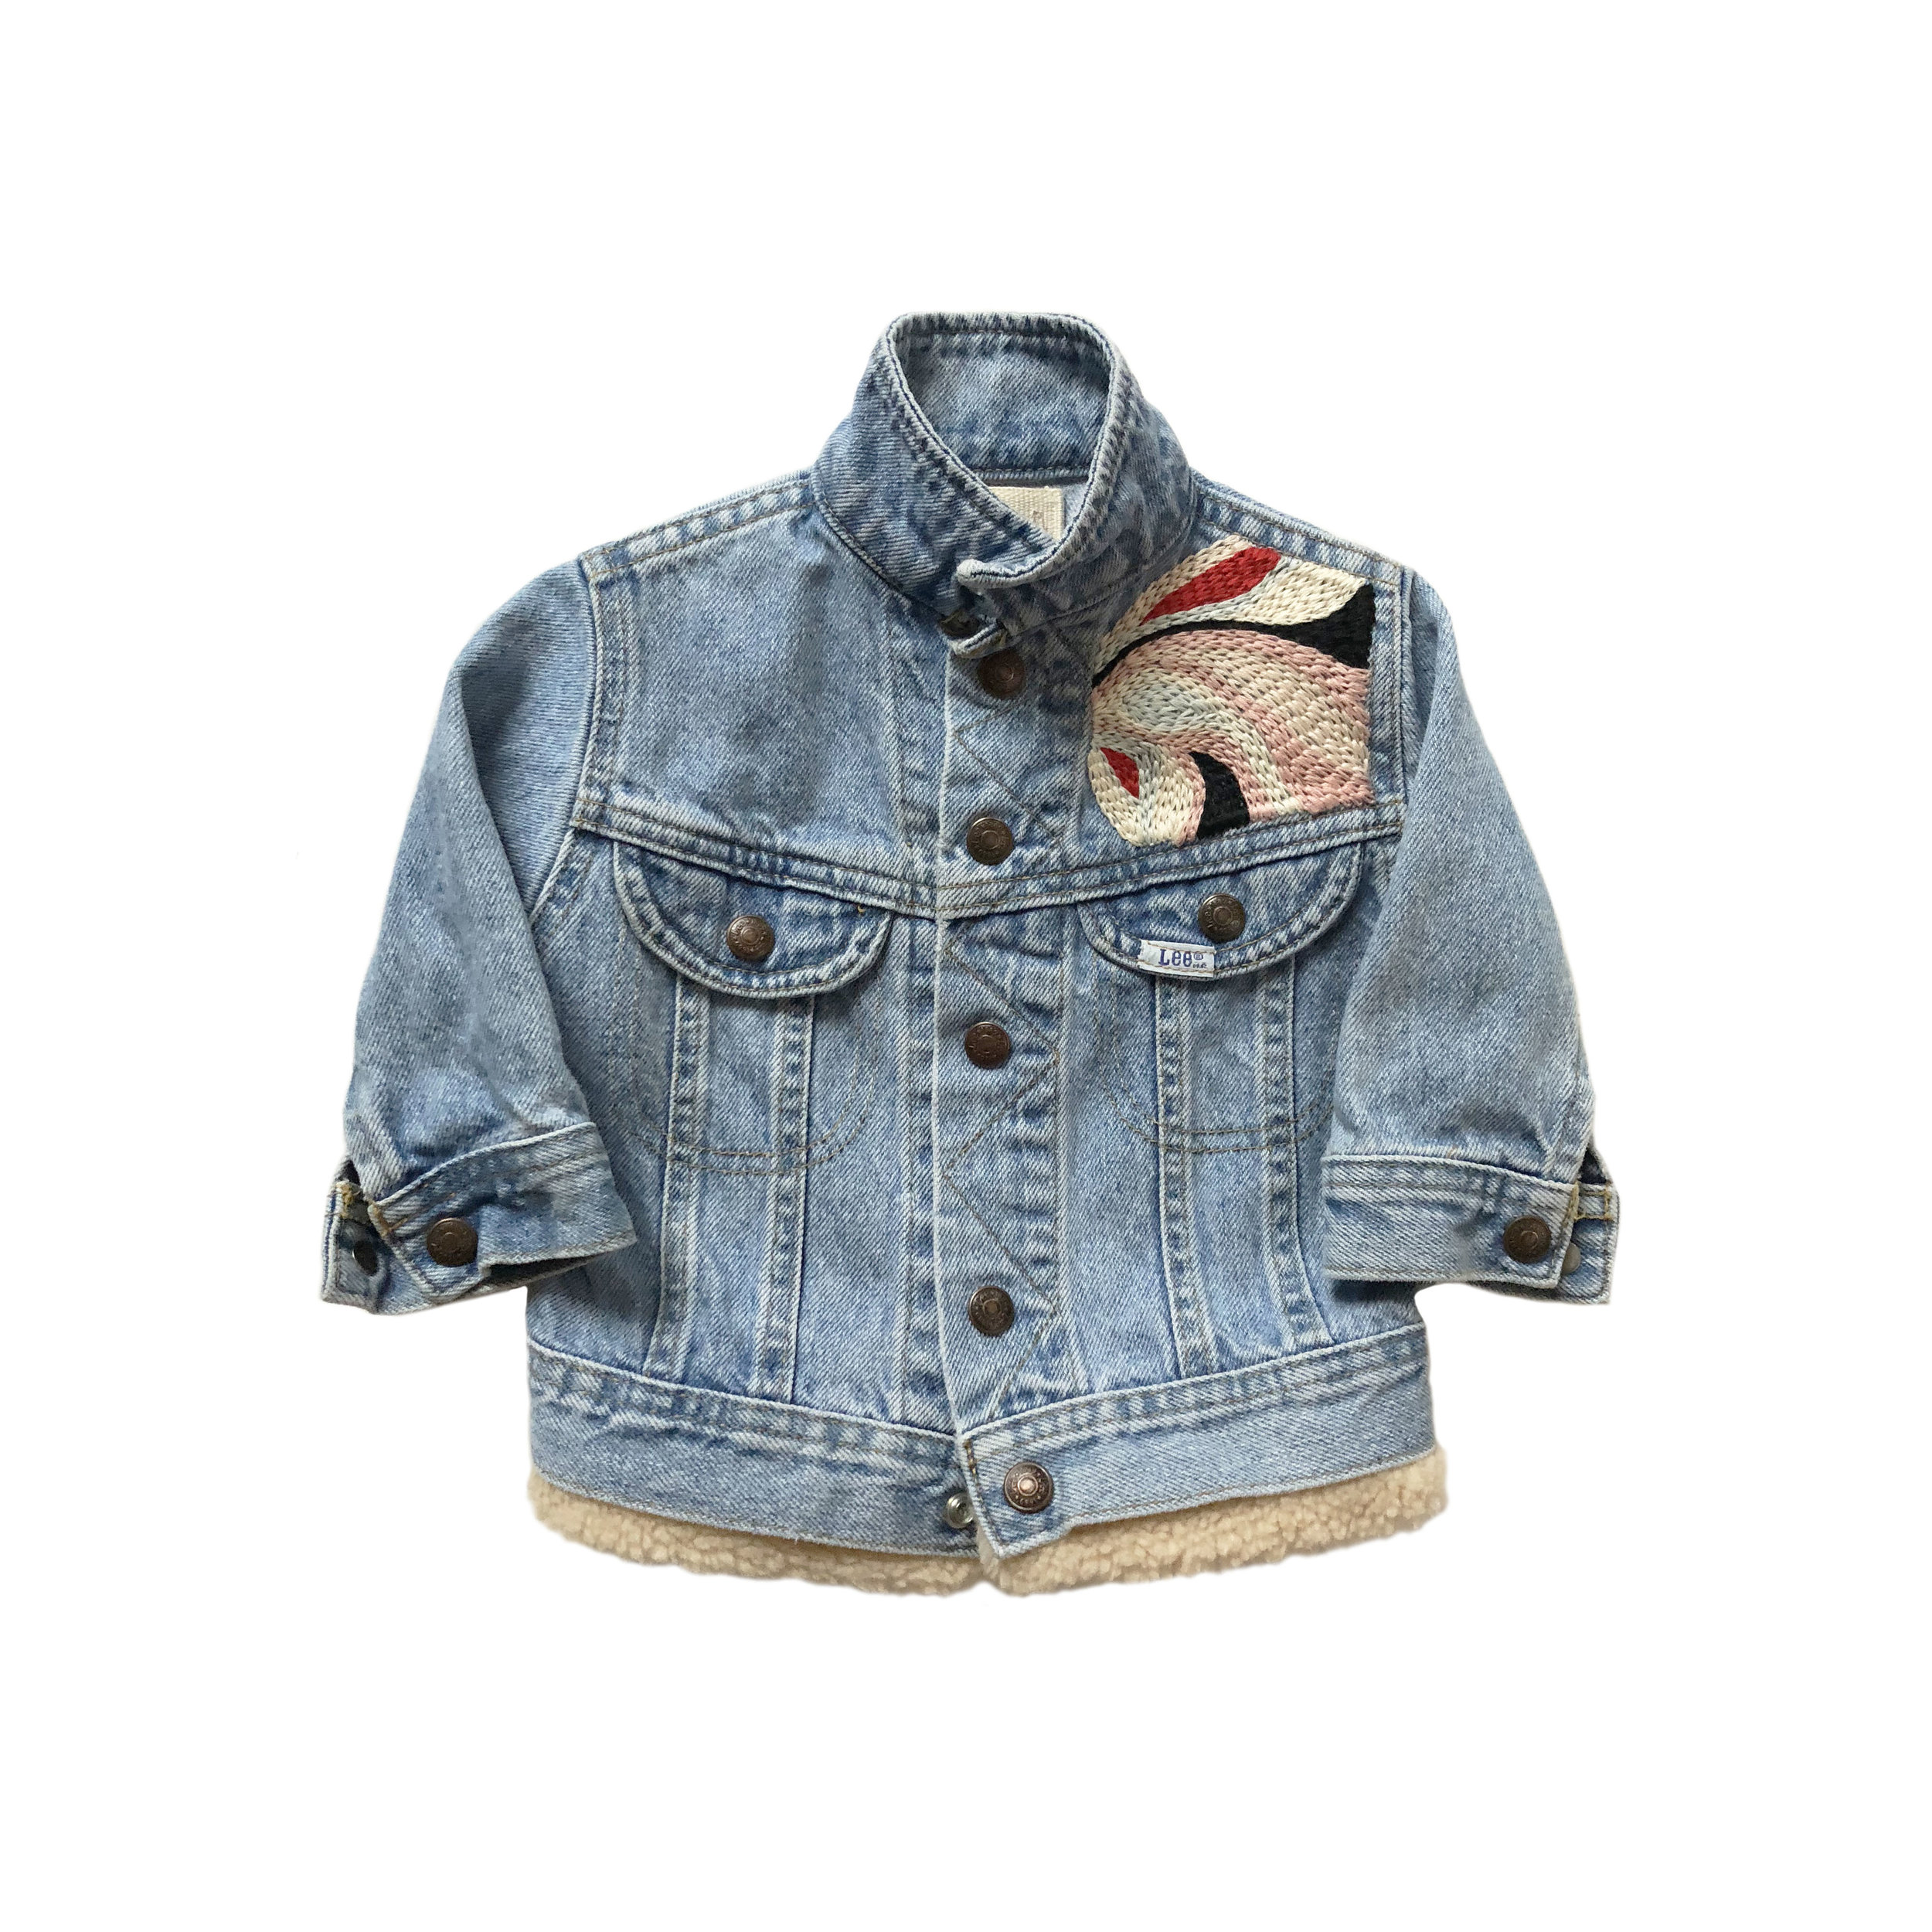 levi's embroidered jean jacket